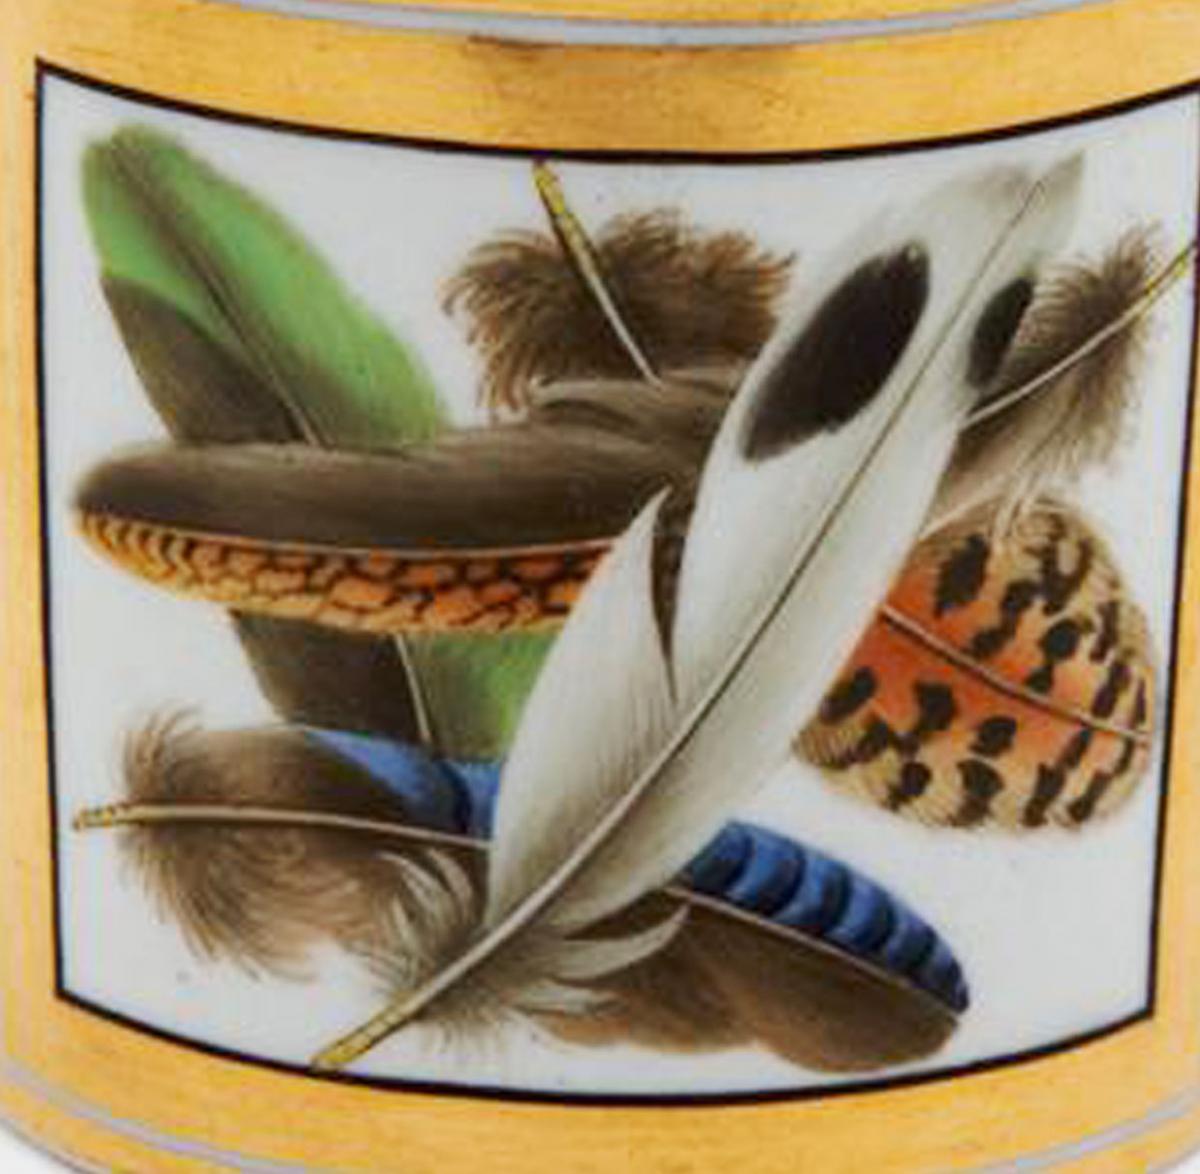 Chamberlain Worcester Porcelain Feather Decorated Inkwell, Circa 1805-10.